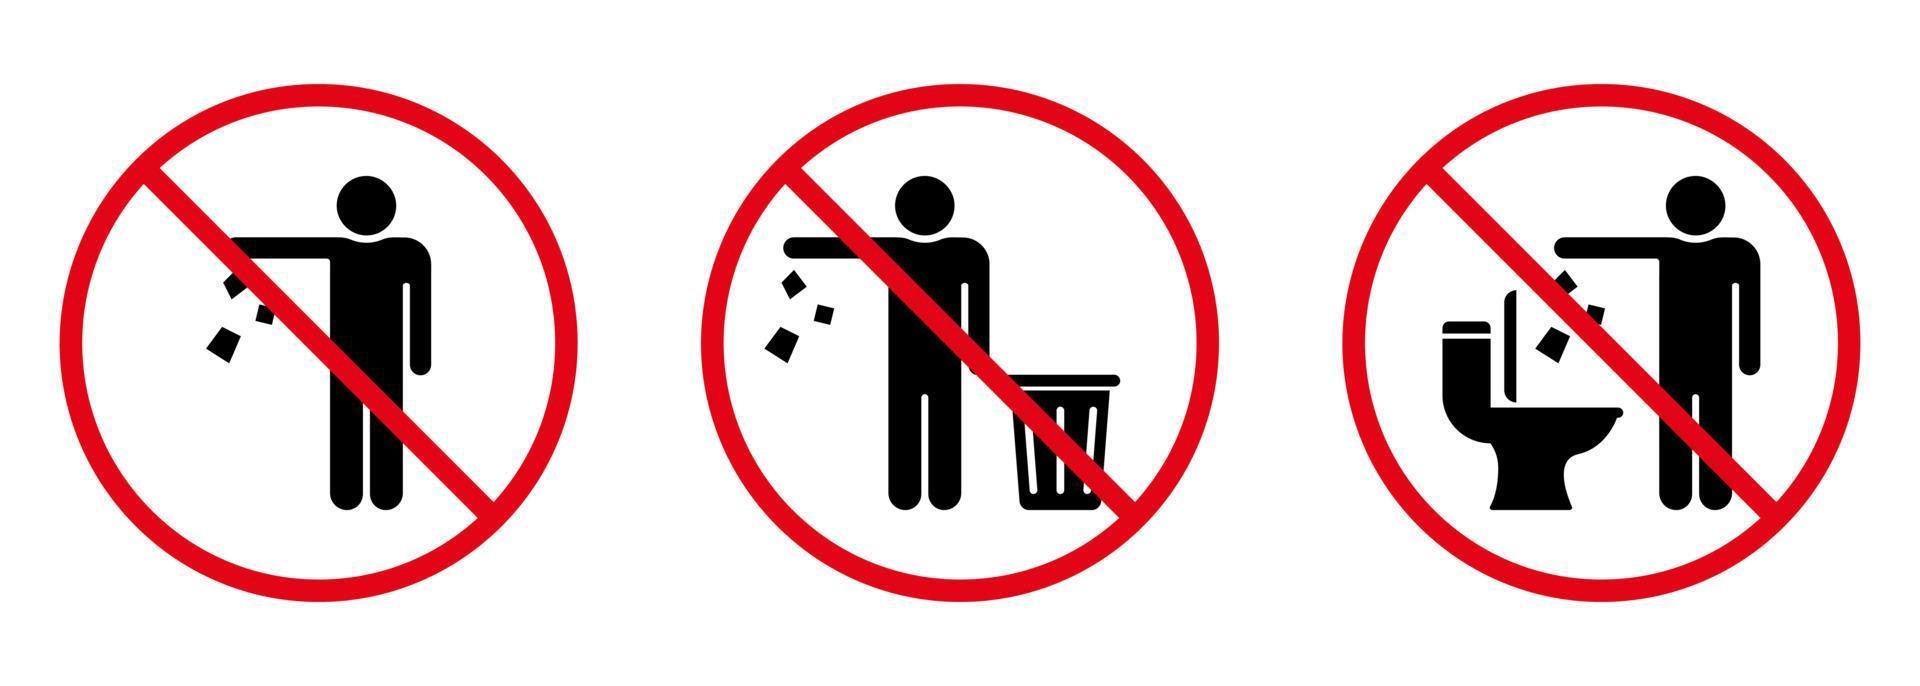 Do Not Throw Trash in Toilet Sign Silhouette Icon. Forbidden Throw Rubbish, Waste, Garbage Symbol. Warning Please Drop Litter in Bin Icon. Keep Clean Glyph Pictogram. Isolated Vector Illustration.